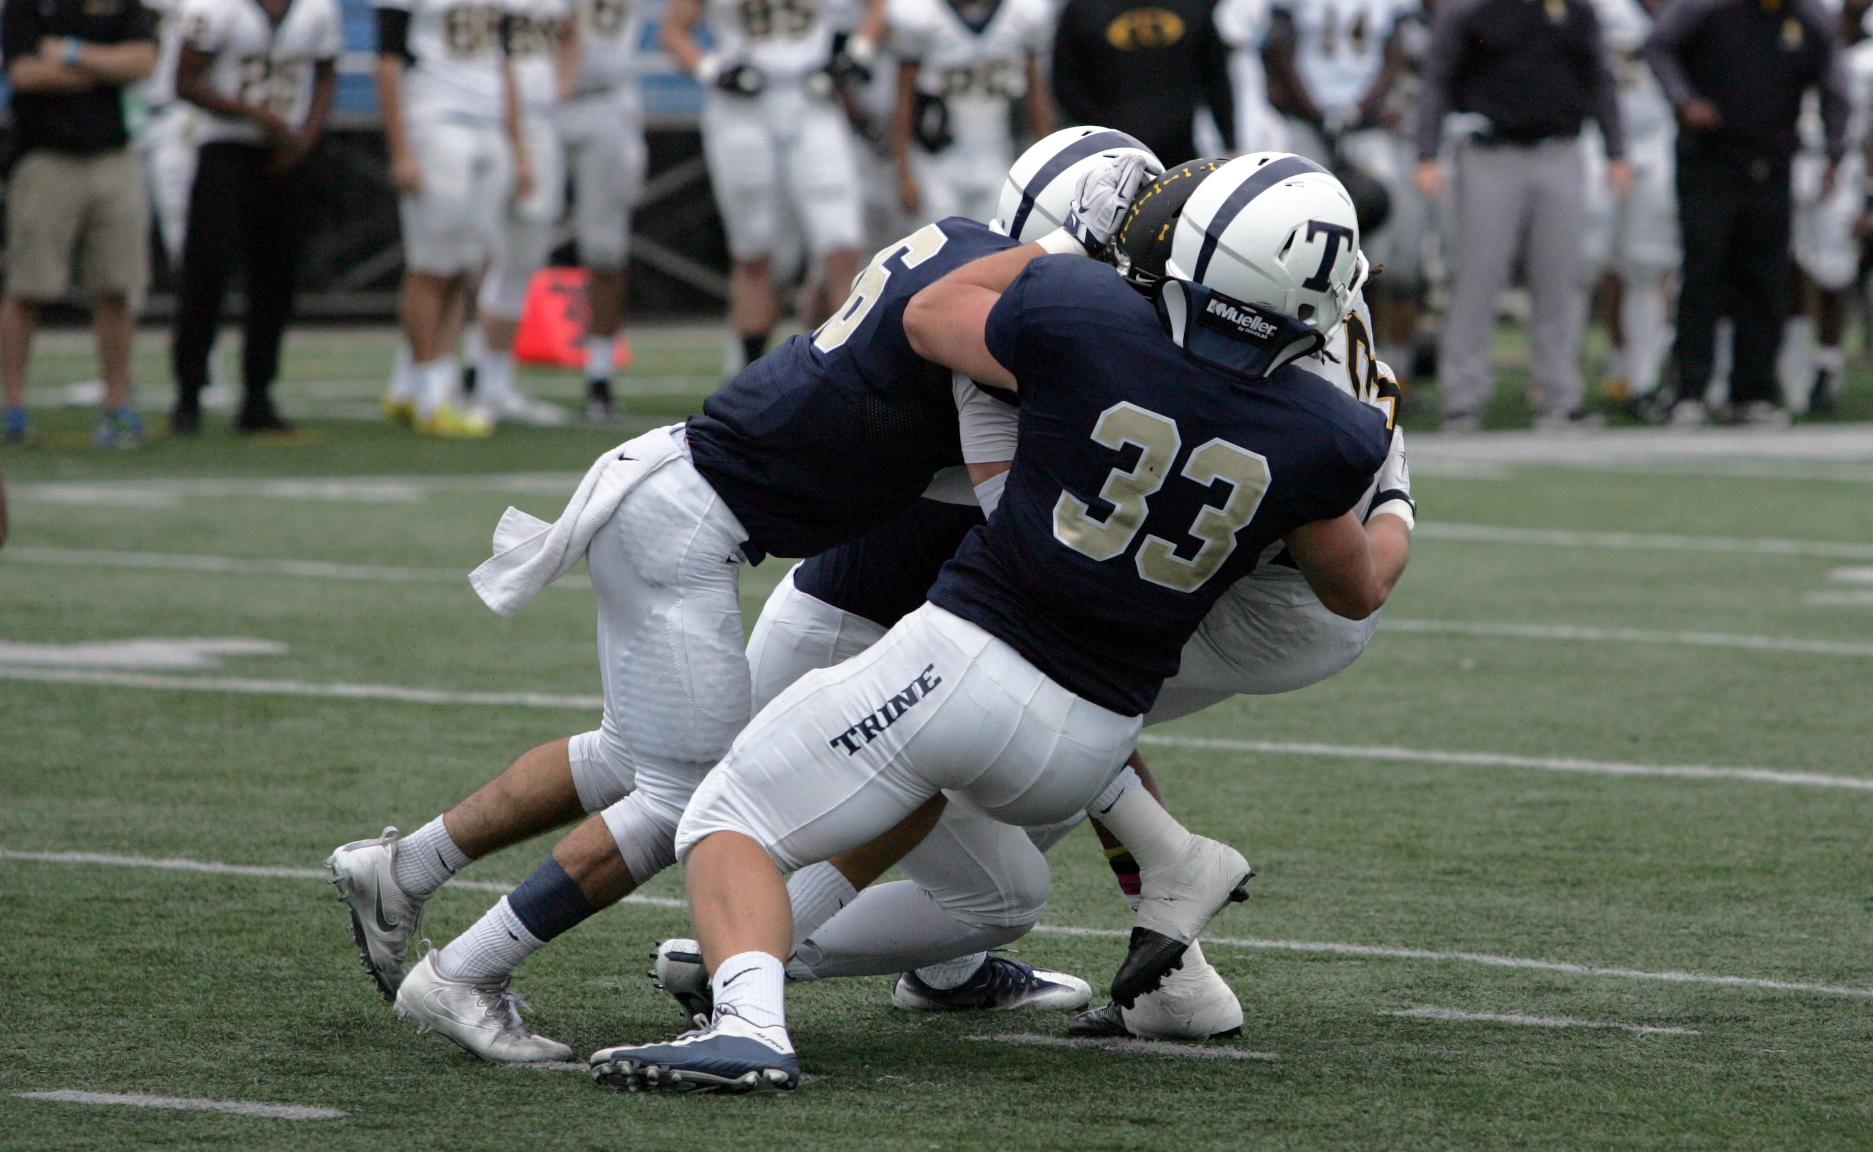 Trine to Face Finlandia as Conference Foe Beginning in 2018